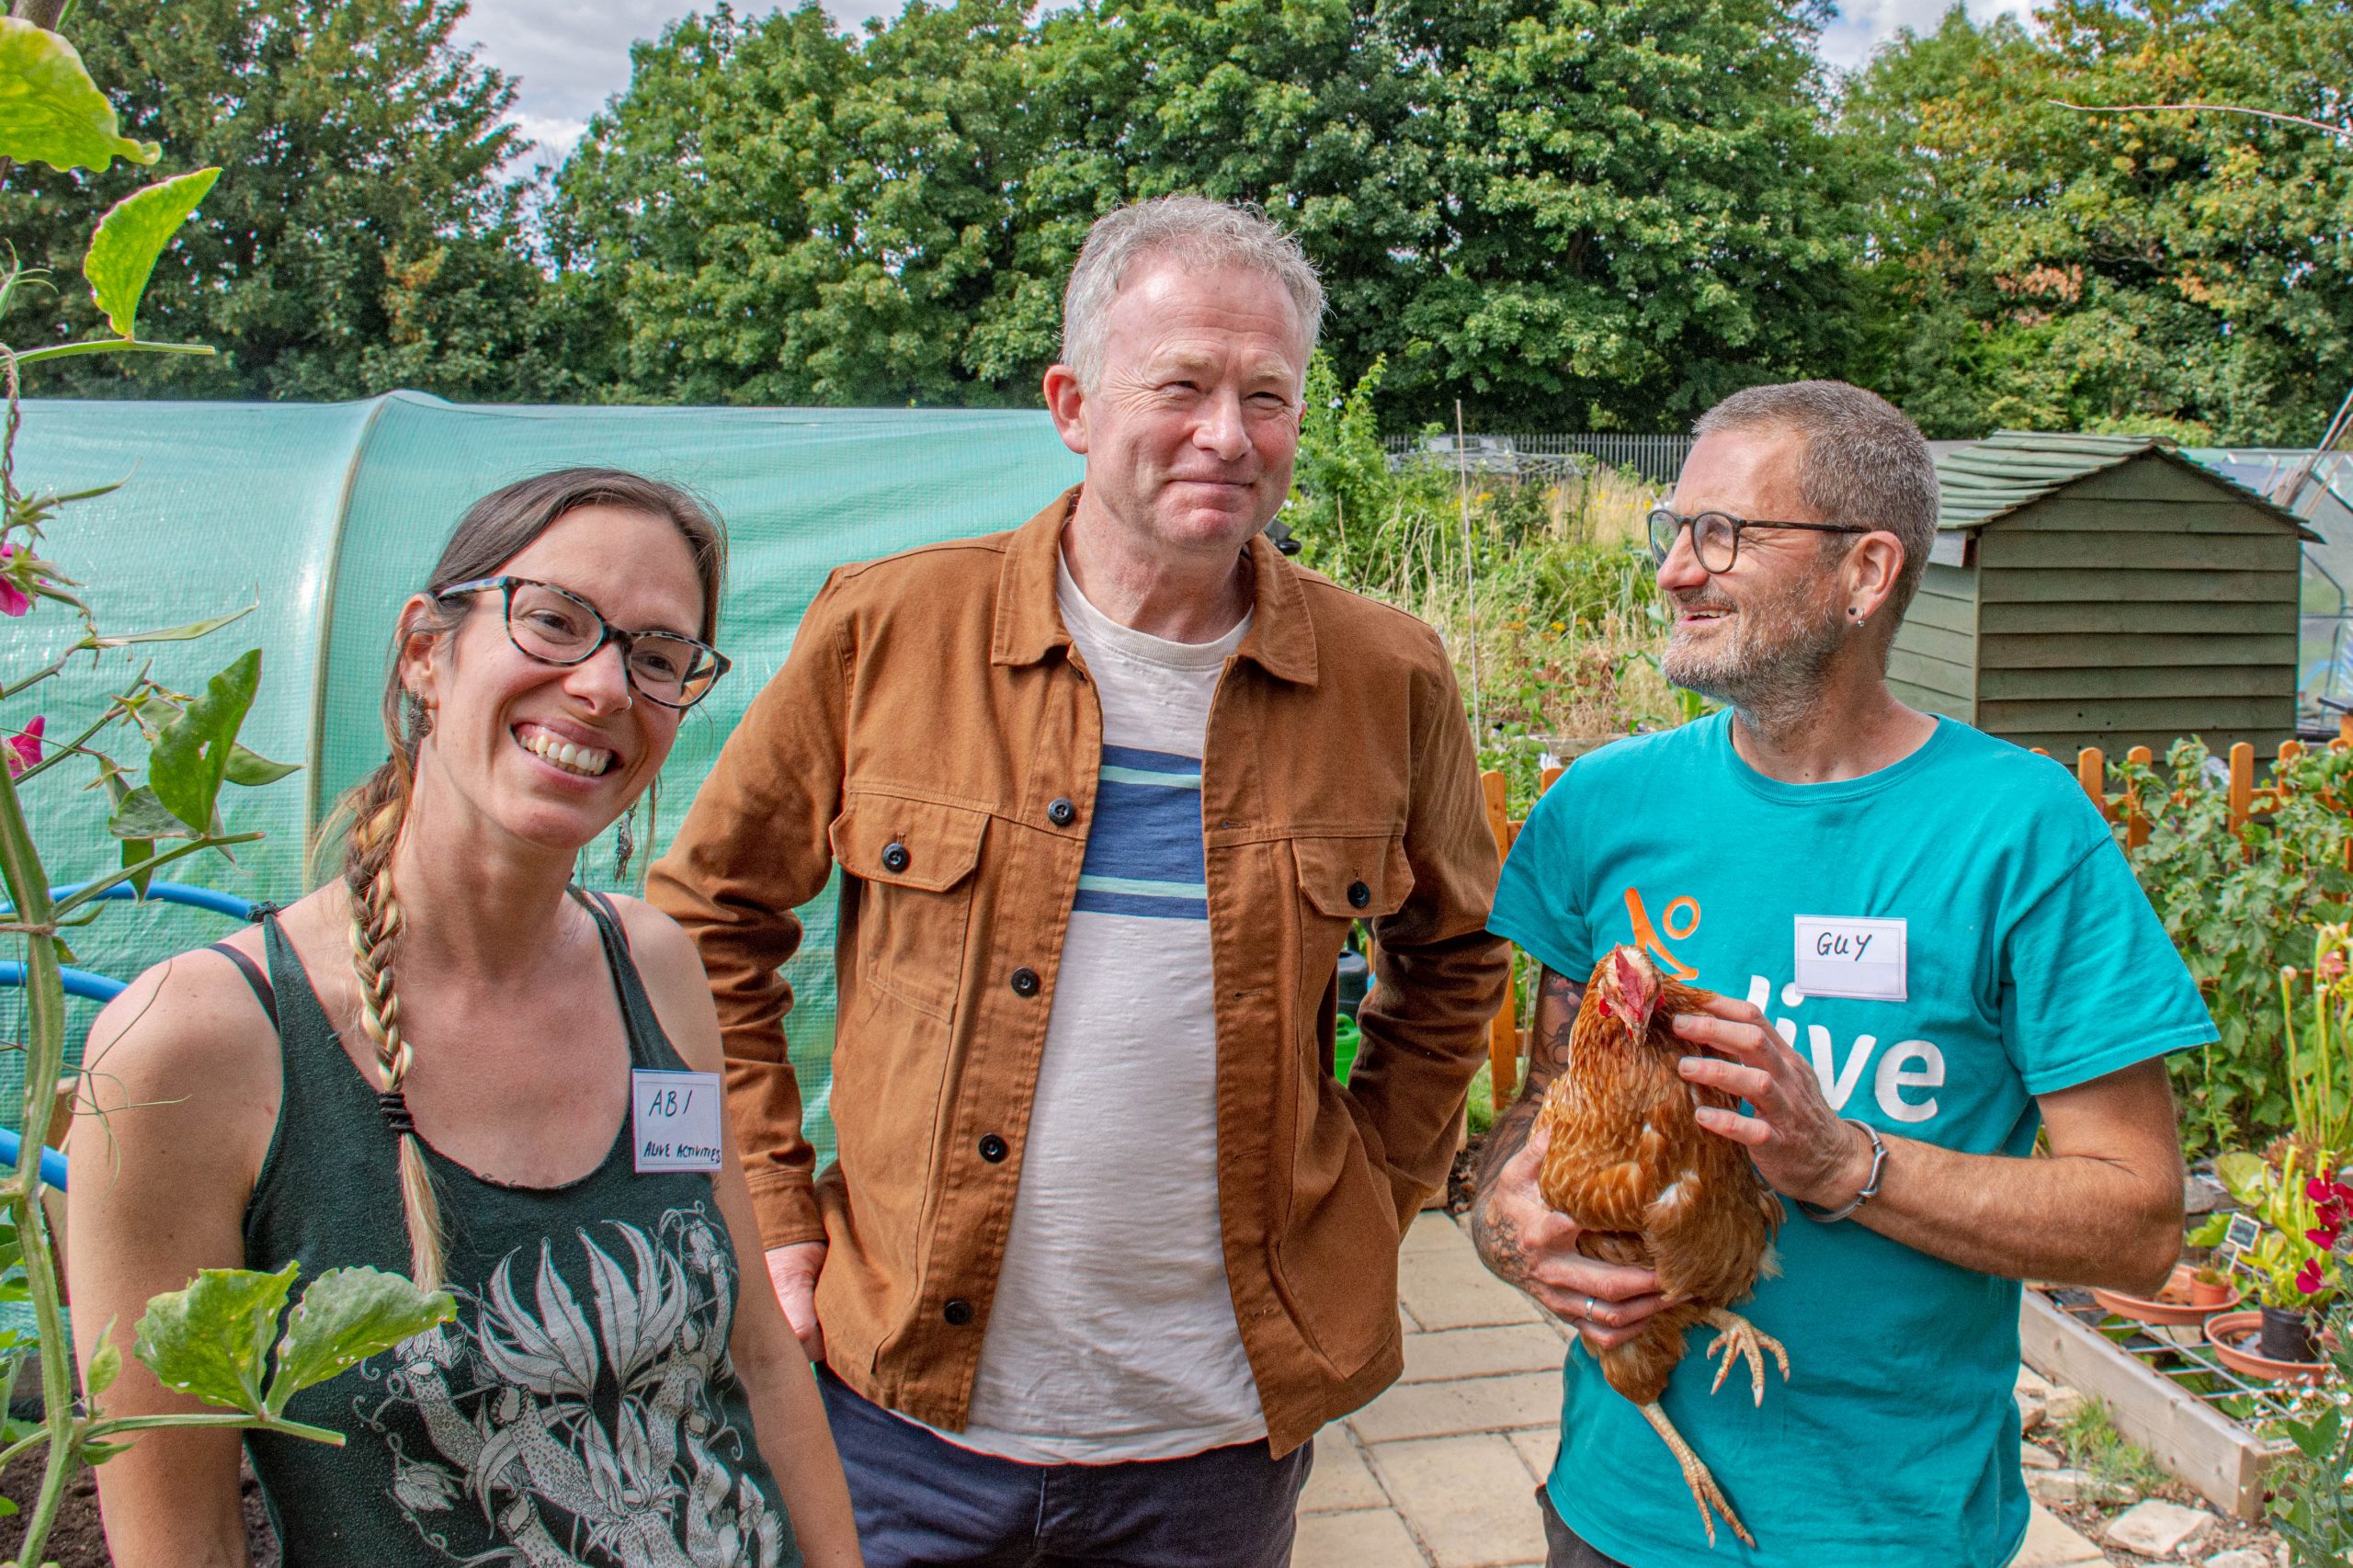 Alive’s dementia-friendly allotment featured on Gardeners’ World this month